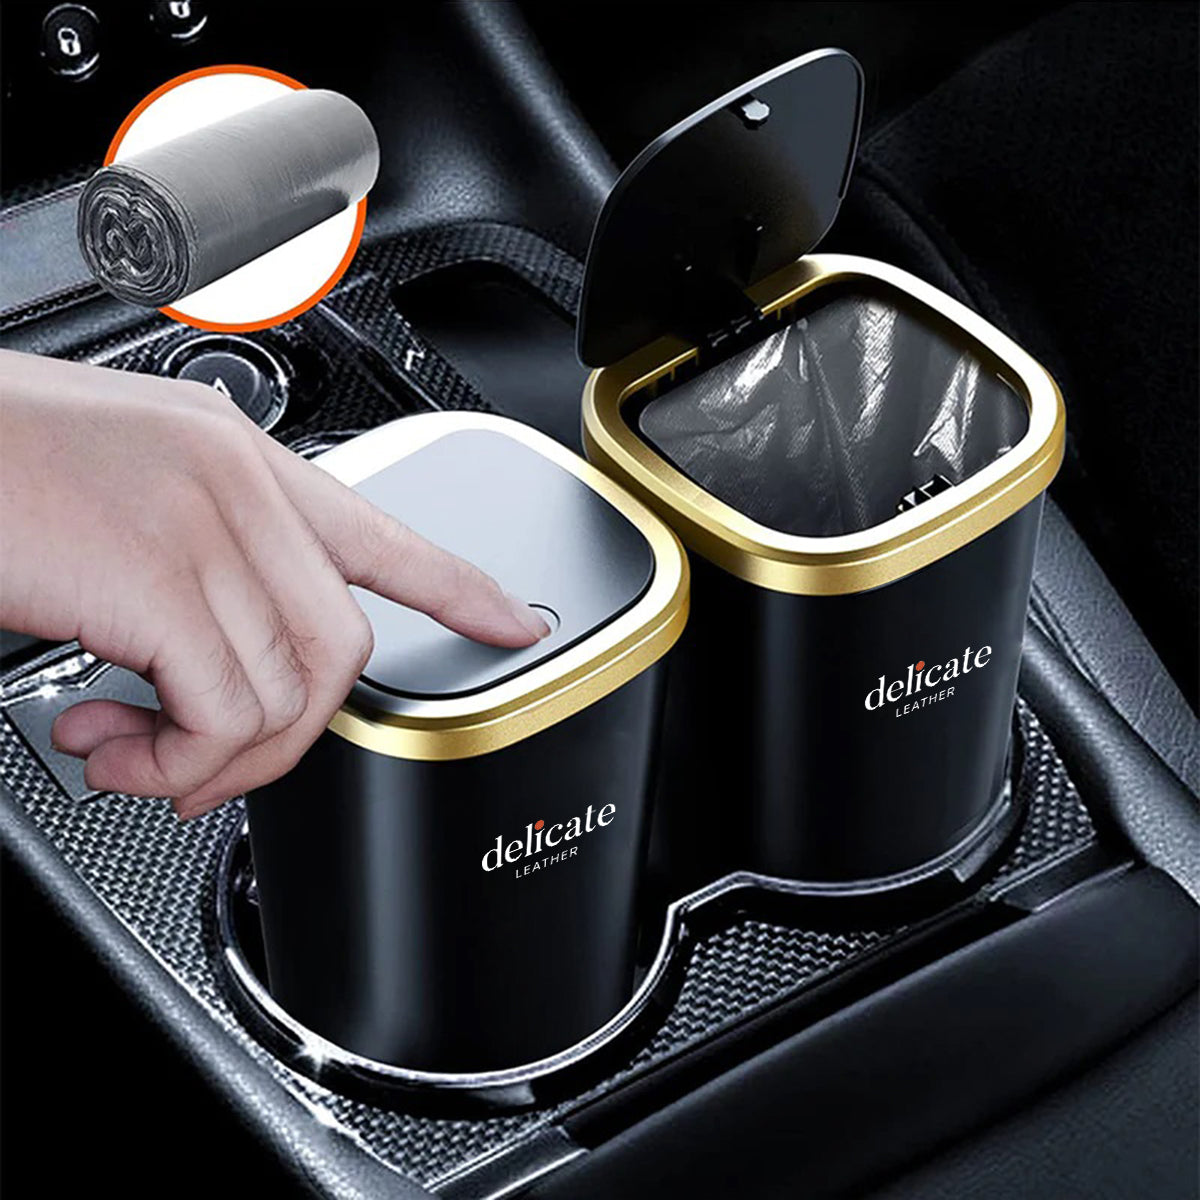 Car Trash Cans, Custom For Your Cars, Compact & Durable Car Accessories for Interior Use 2 Pack, Practical Car Organizers and Storage Cups with Pop-Up Open, Car Accessories TY11993 - Delicate Leather